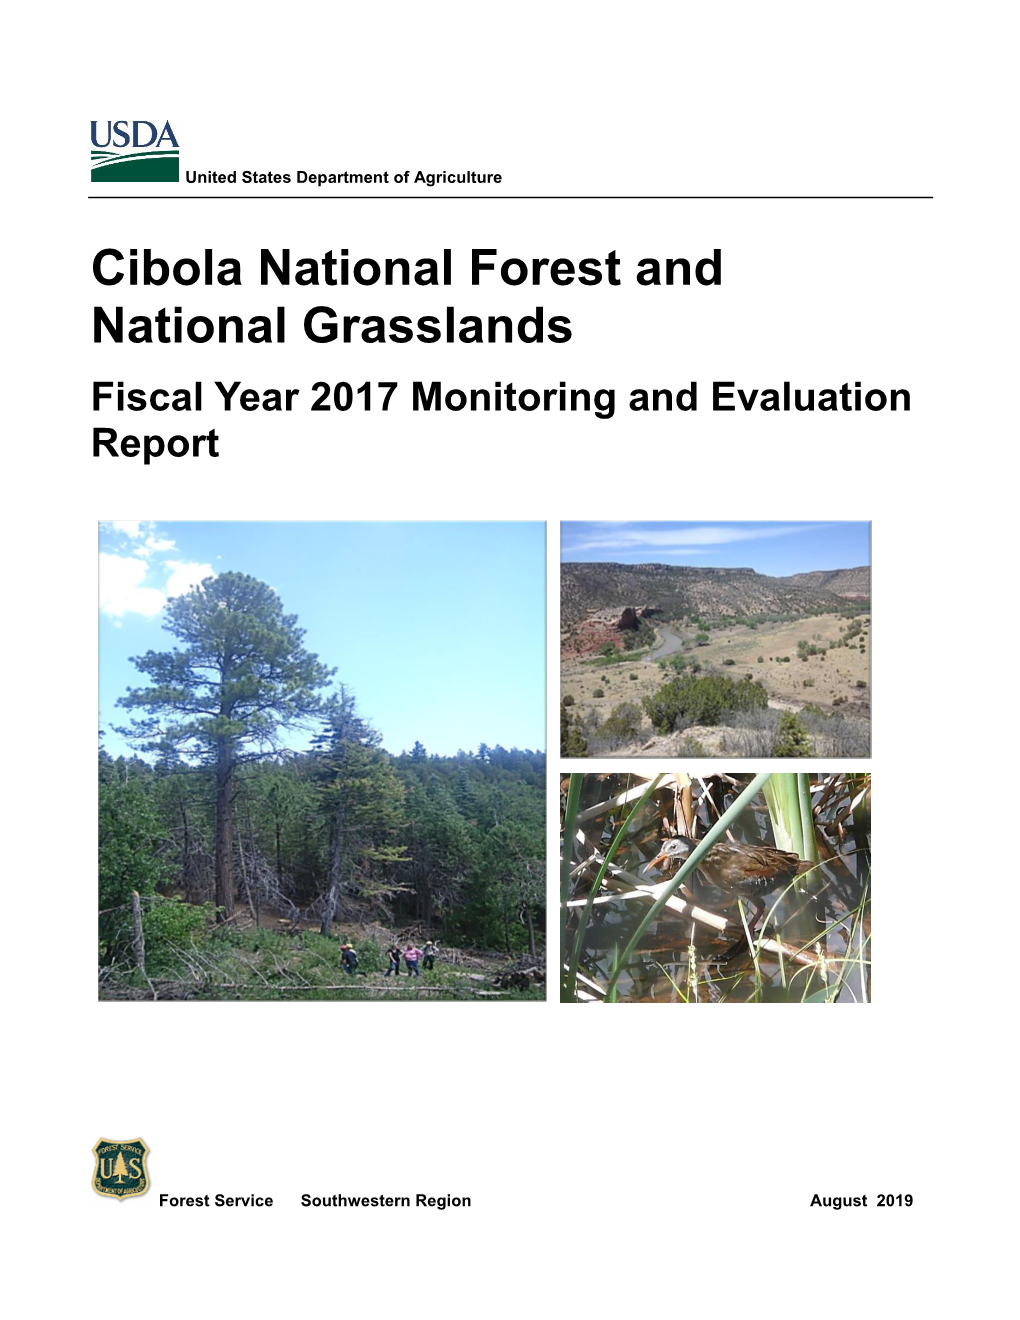 Cibola National Forest and National Grasslands Fiscal Year 2017 Monitoring and Evaluation Report